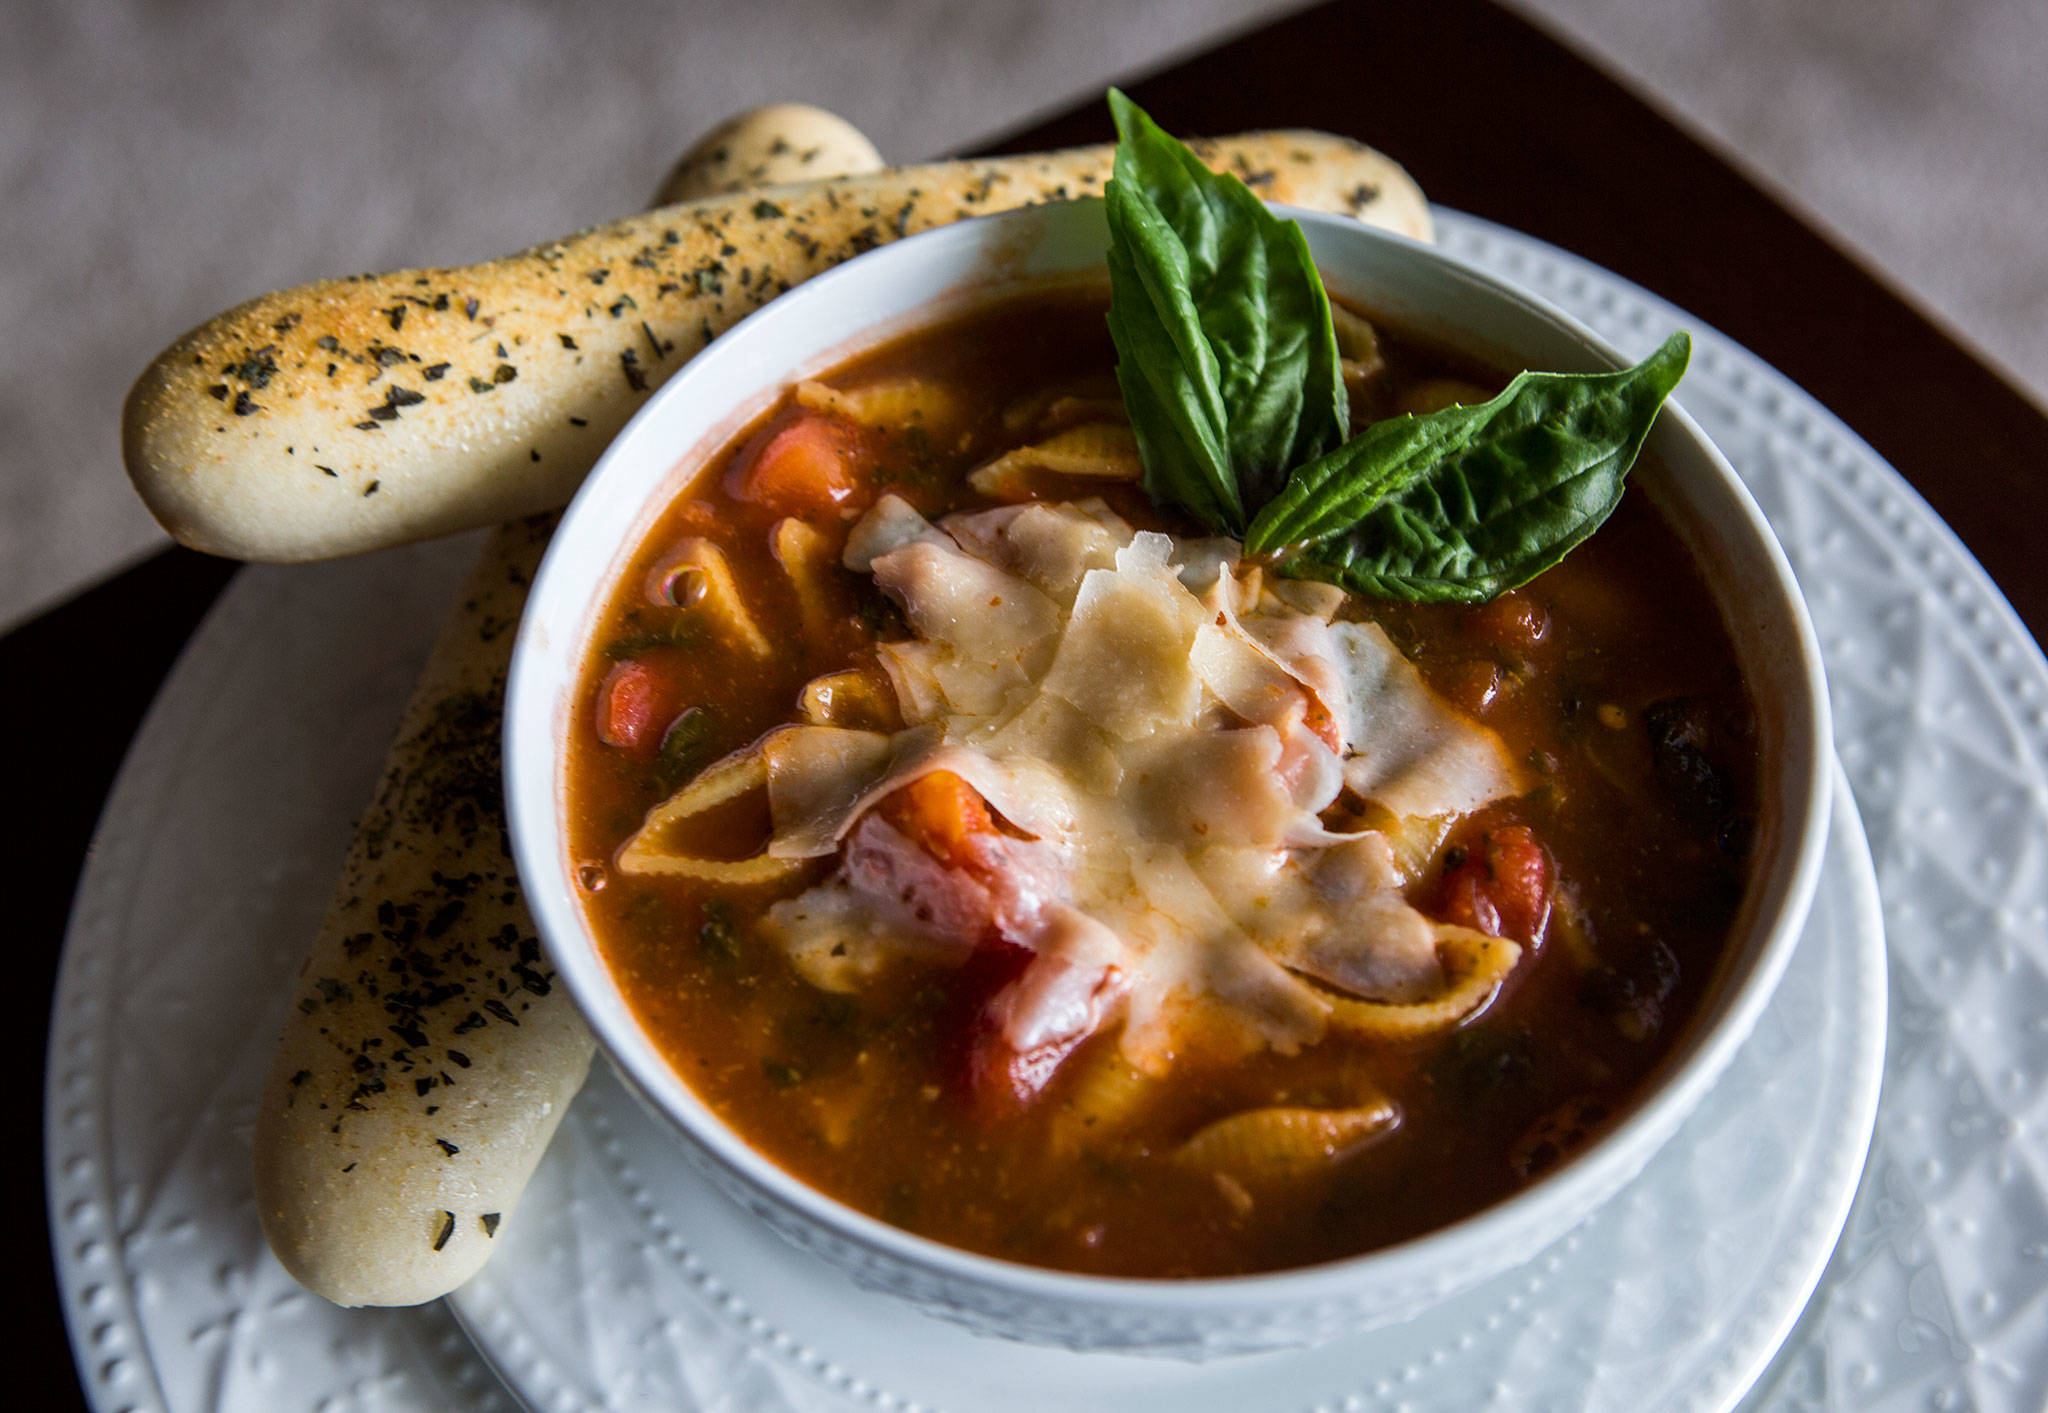 Pasta Fagioli with fresh breadsticks, basil and shredded parmesan cheese. (Olivia Vanni / The Herald)